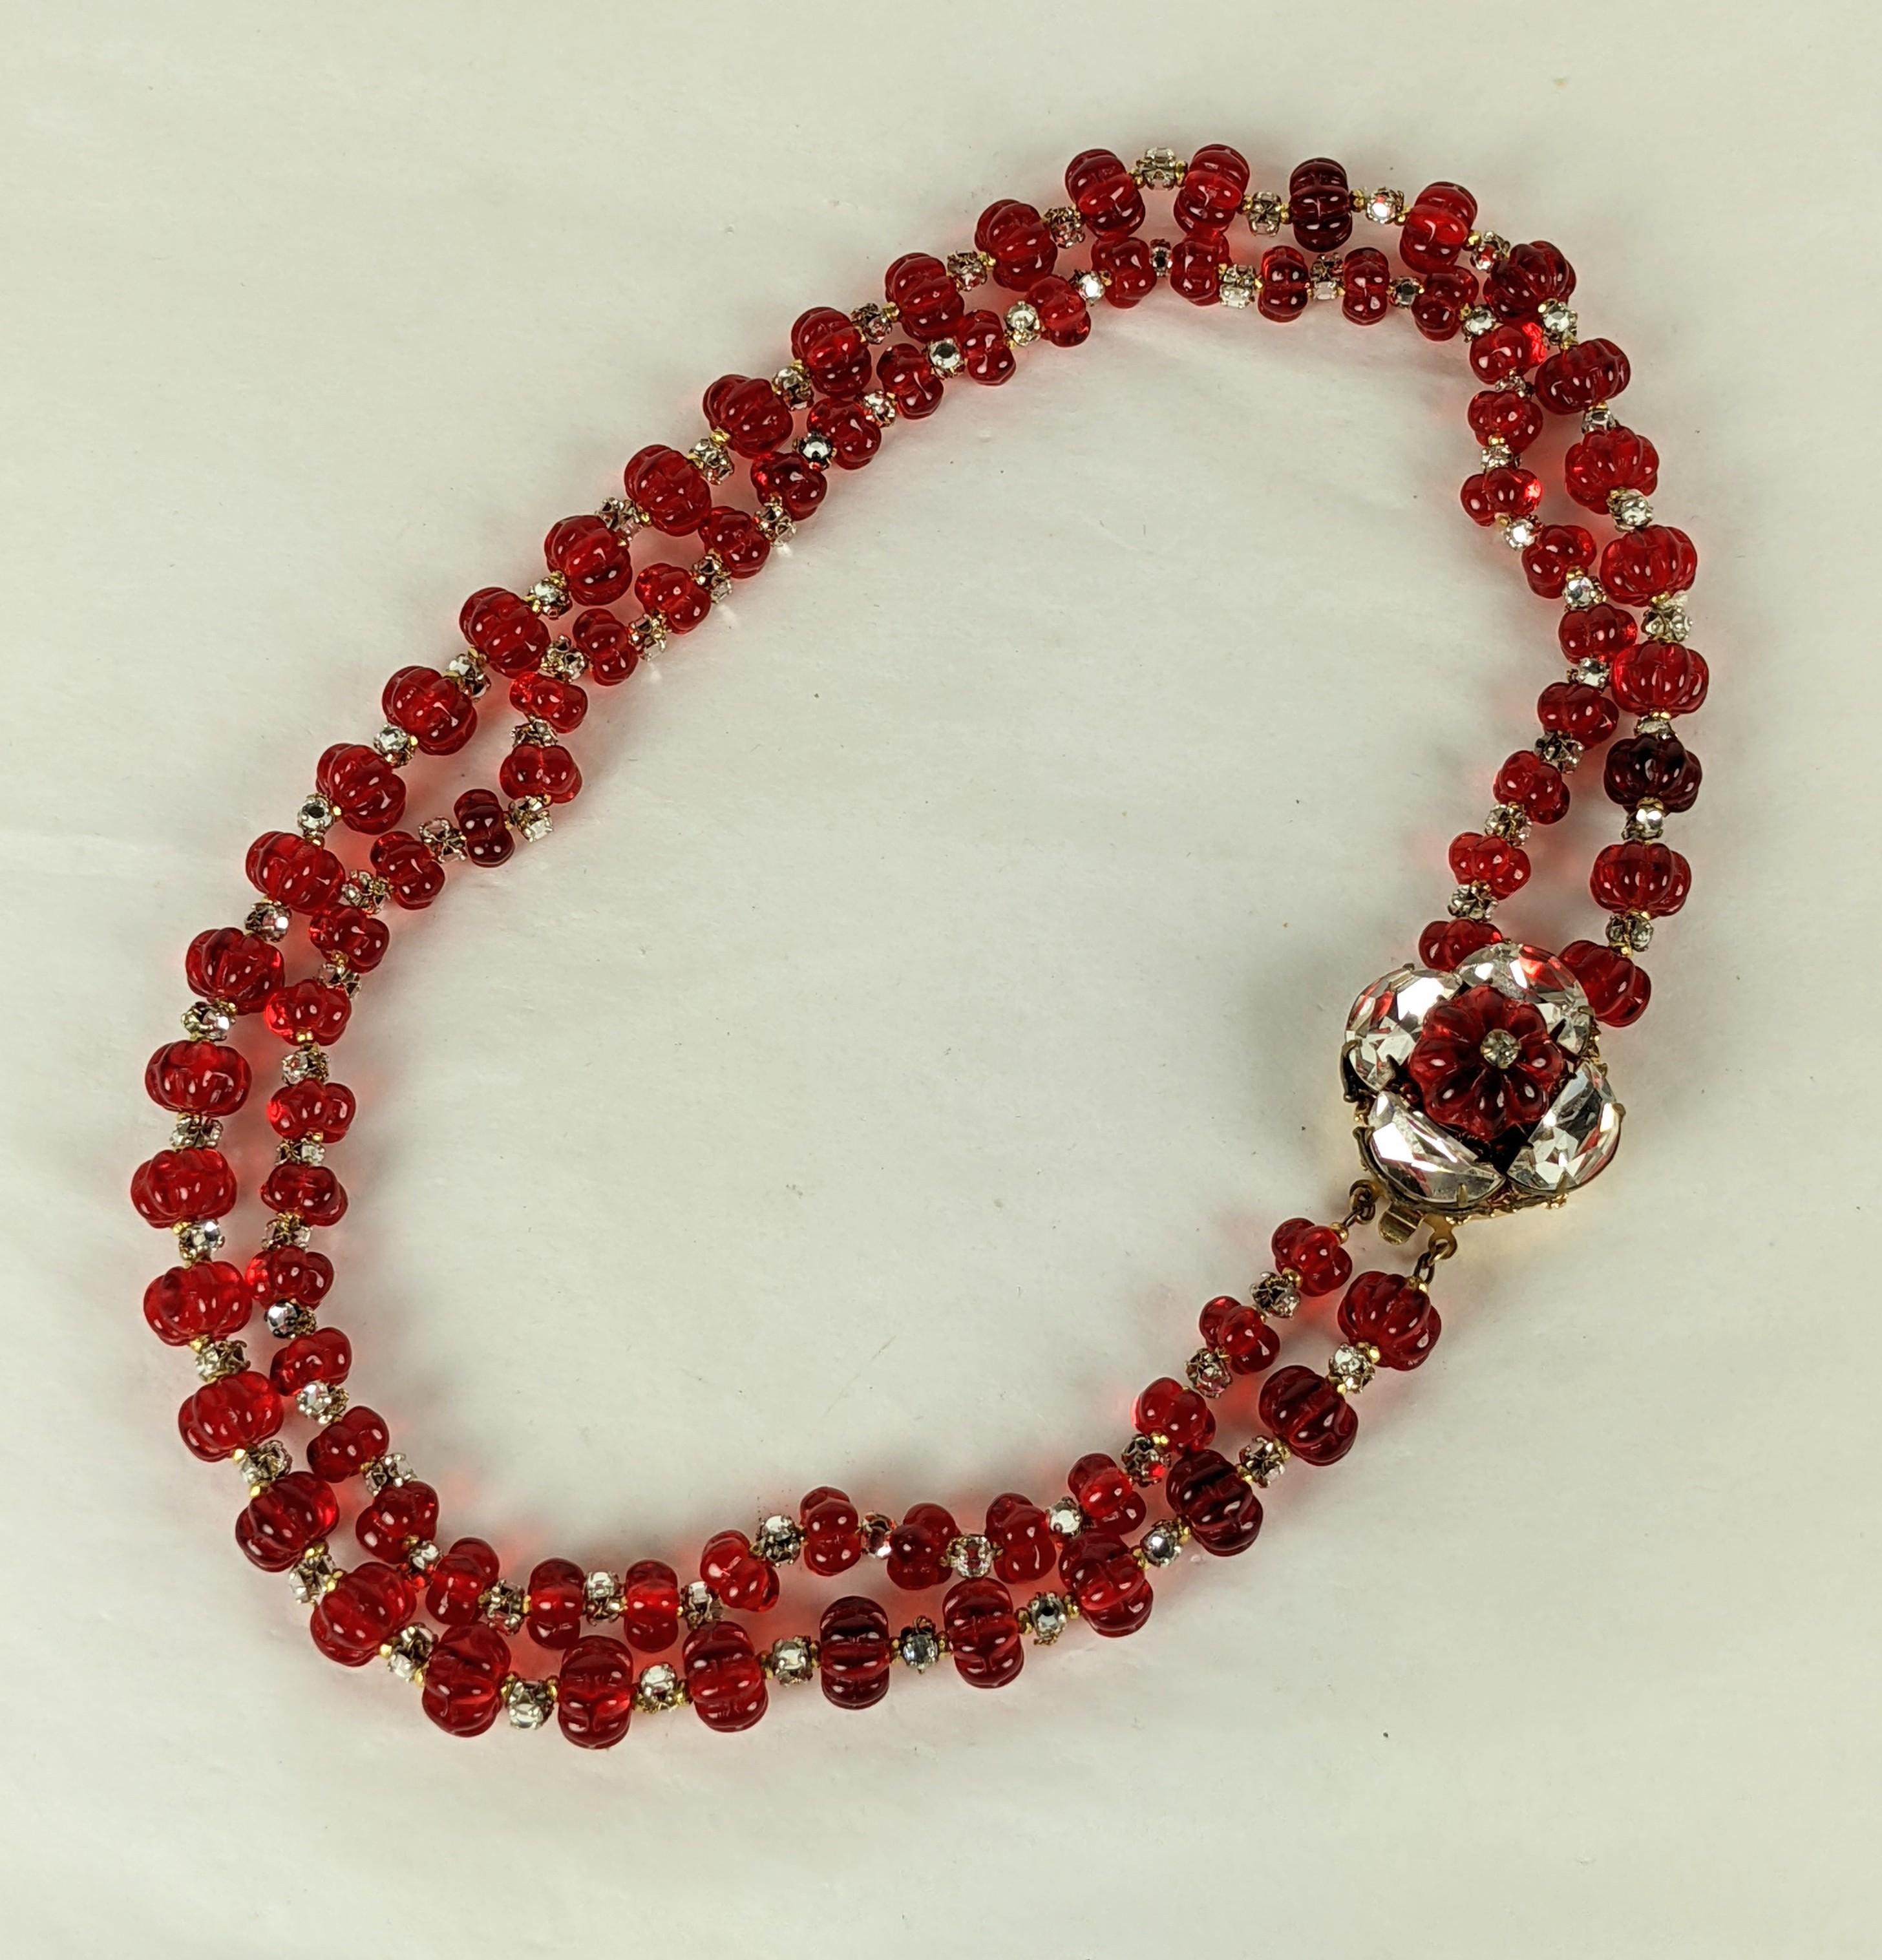 Rare and collectible Miriam Haskell Anglo Indian inspired two strand ruby Gripoix glass melon bead choker necklace. Of signature Russian gilt filigree backings with hand sewn demi lune crystals and crystal rose montes forming flower head clasp. The